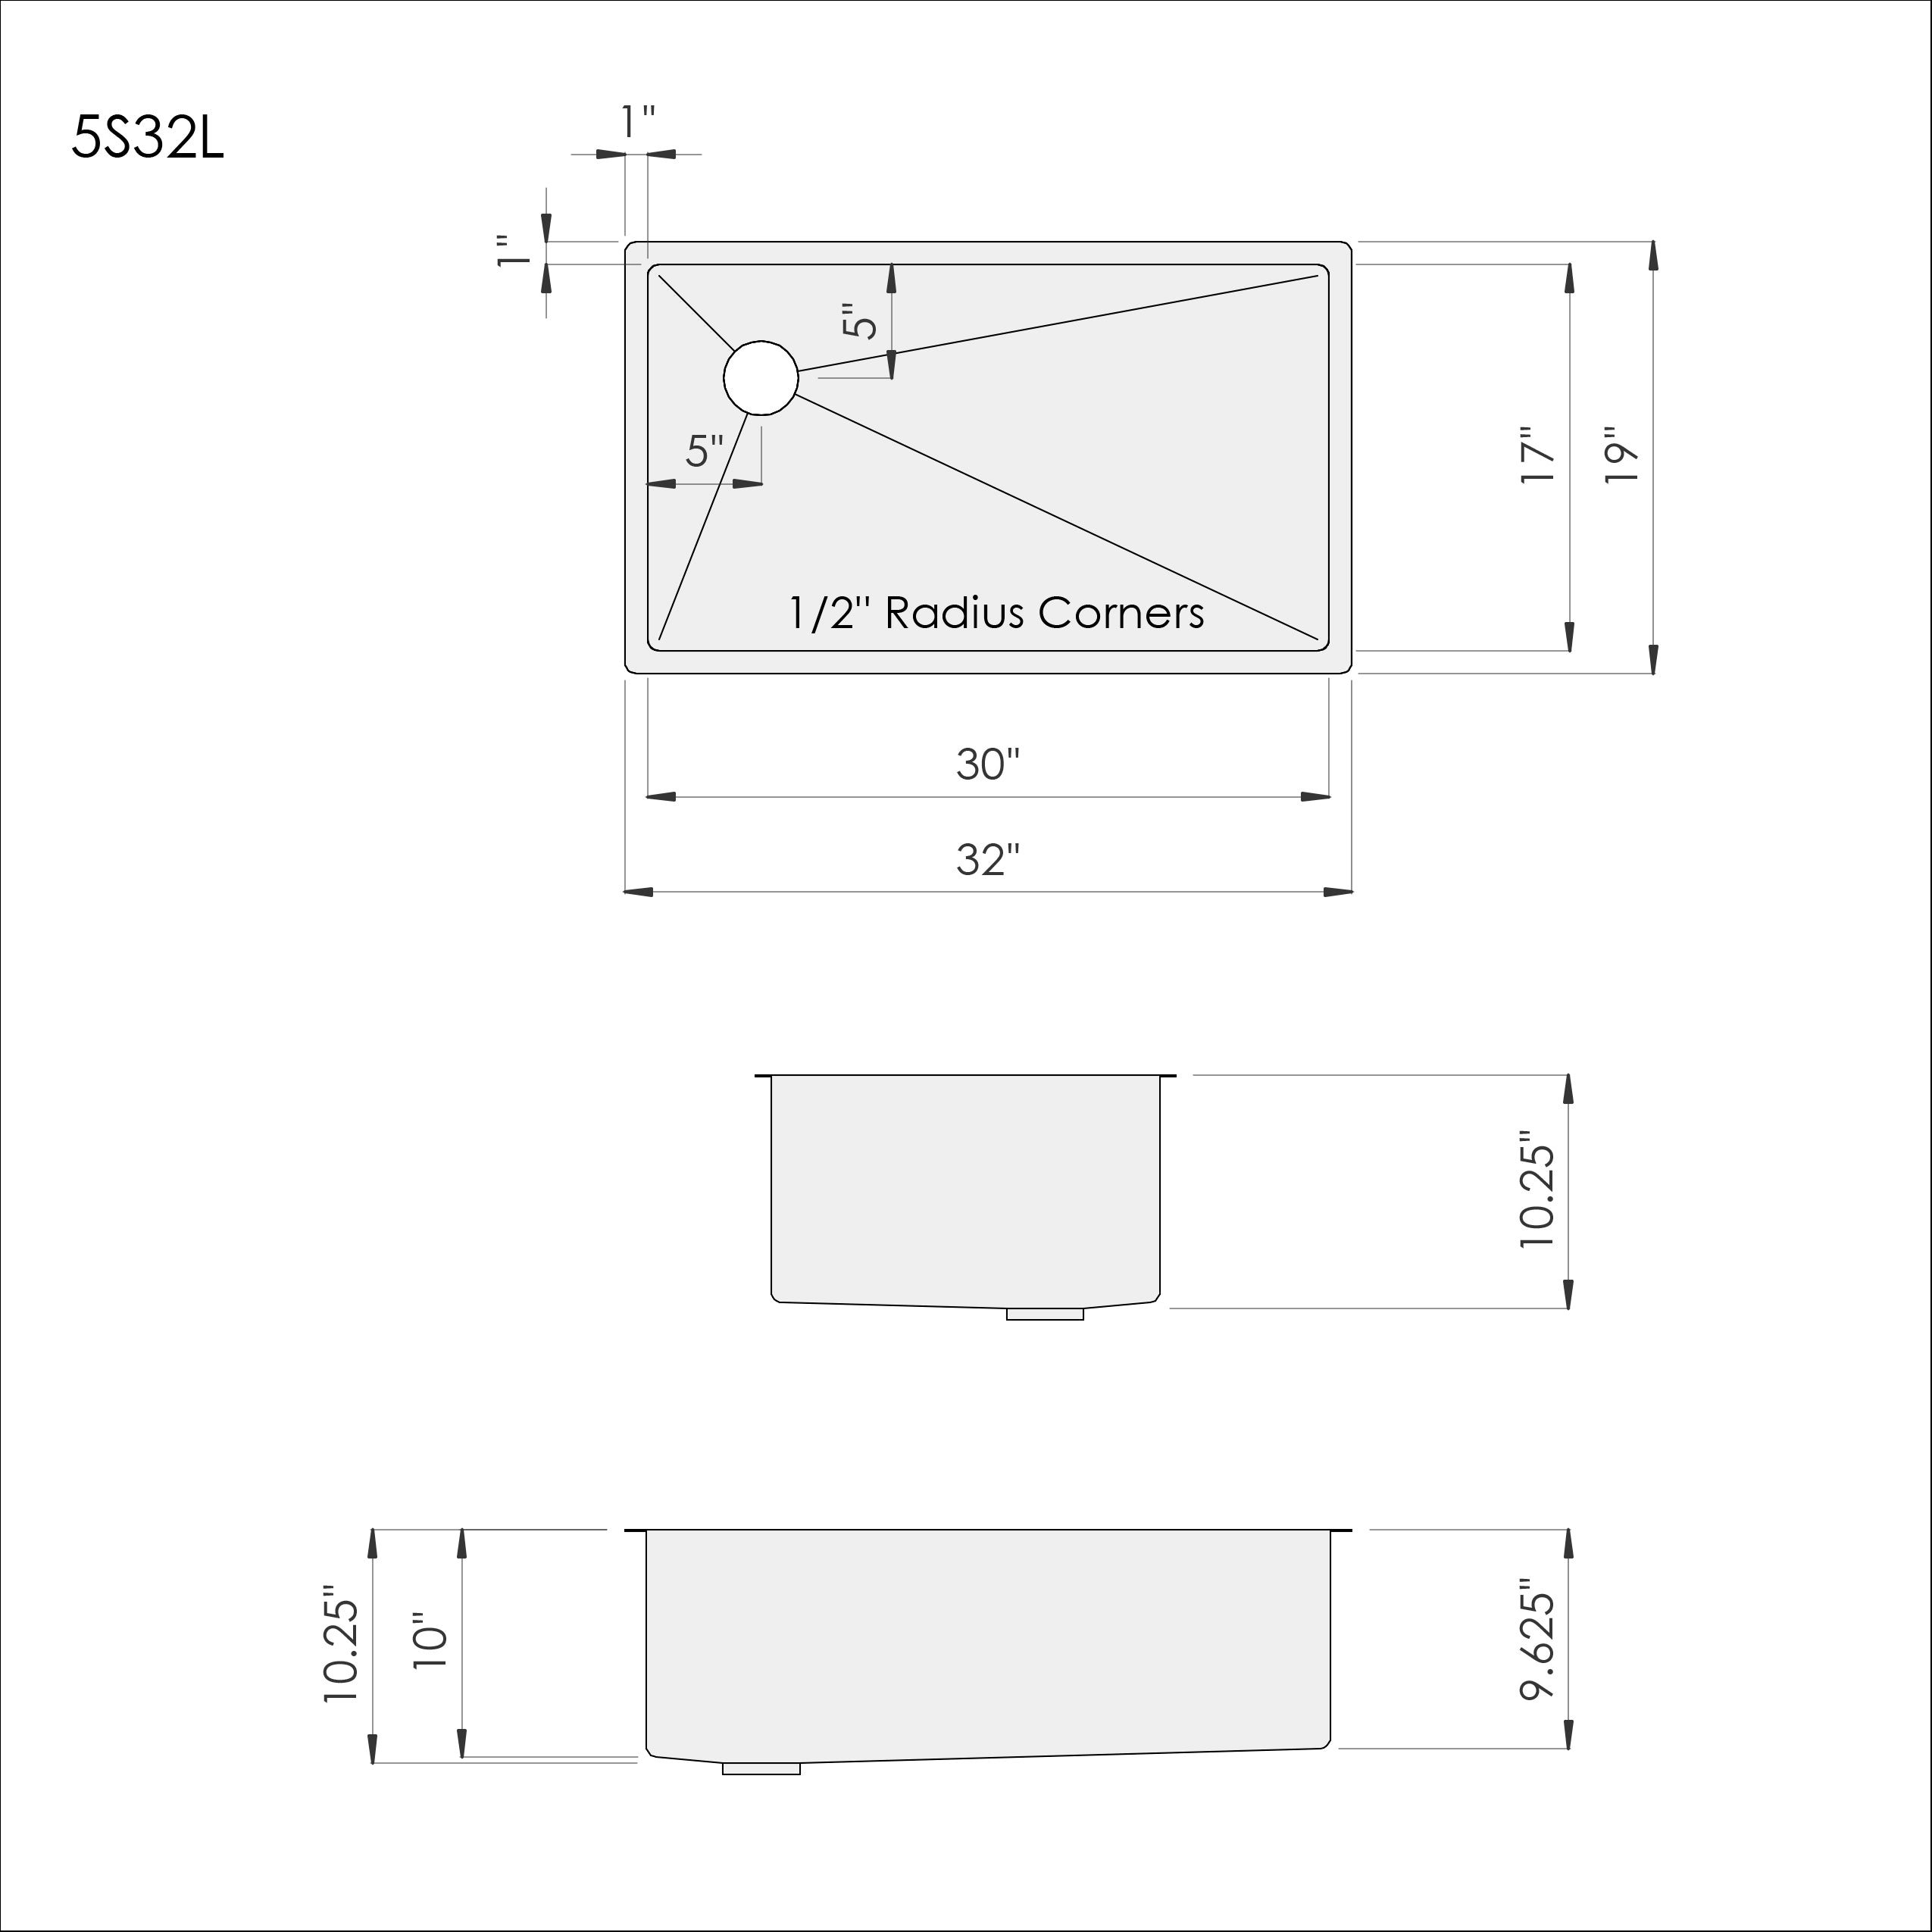 Dimensions of Create Good Sinks 32 inch stainless steel undermount kitchen sink with offset drain on the left. Patented seamless drain design and 10 inch depth